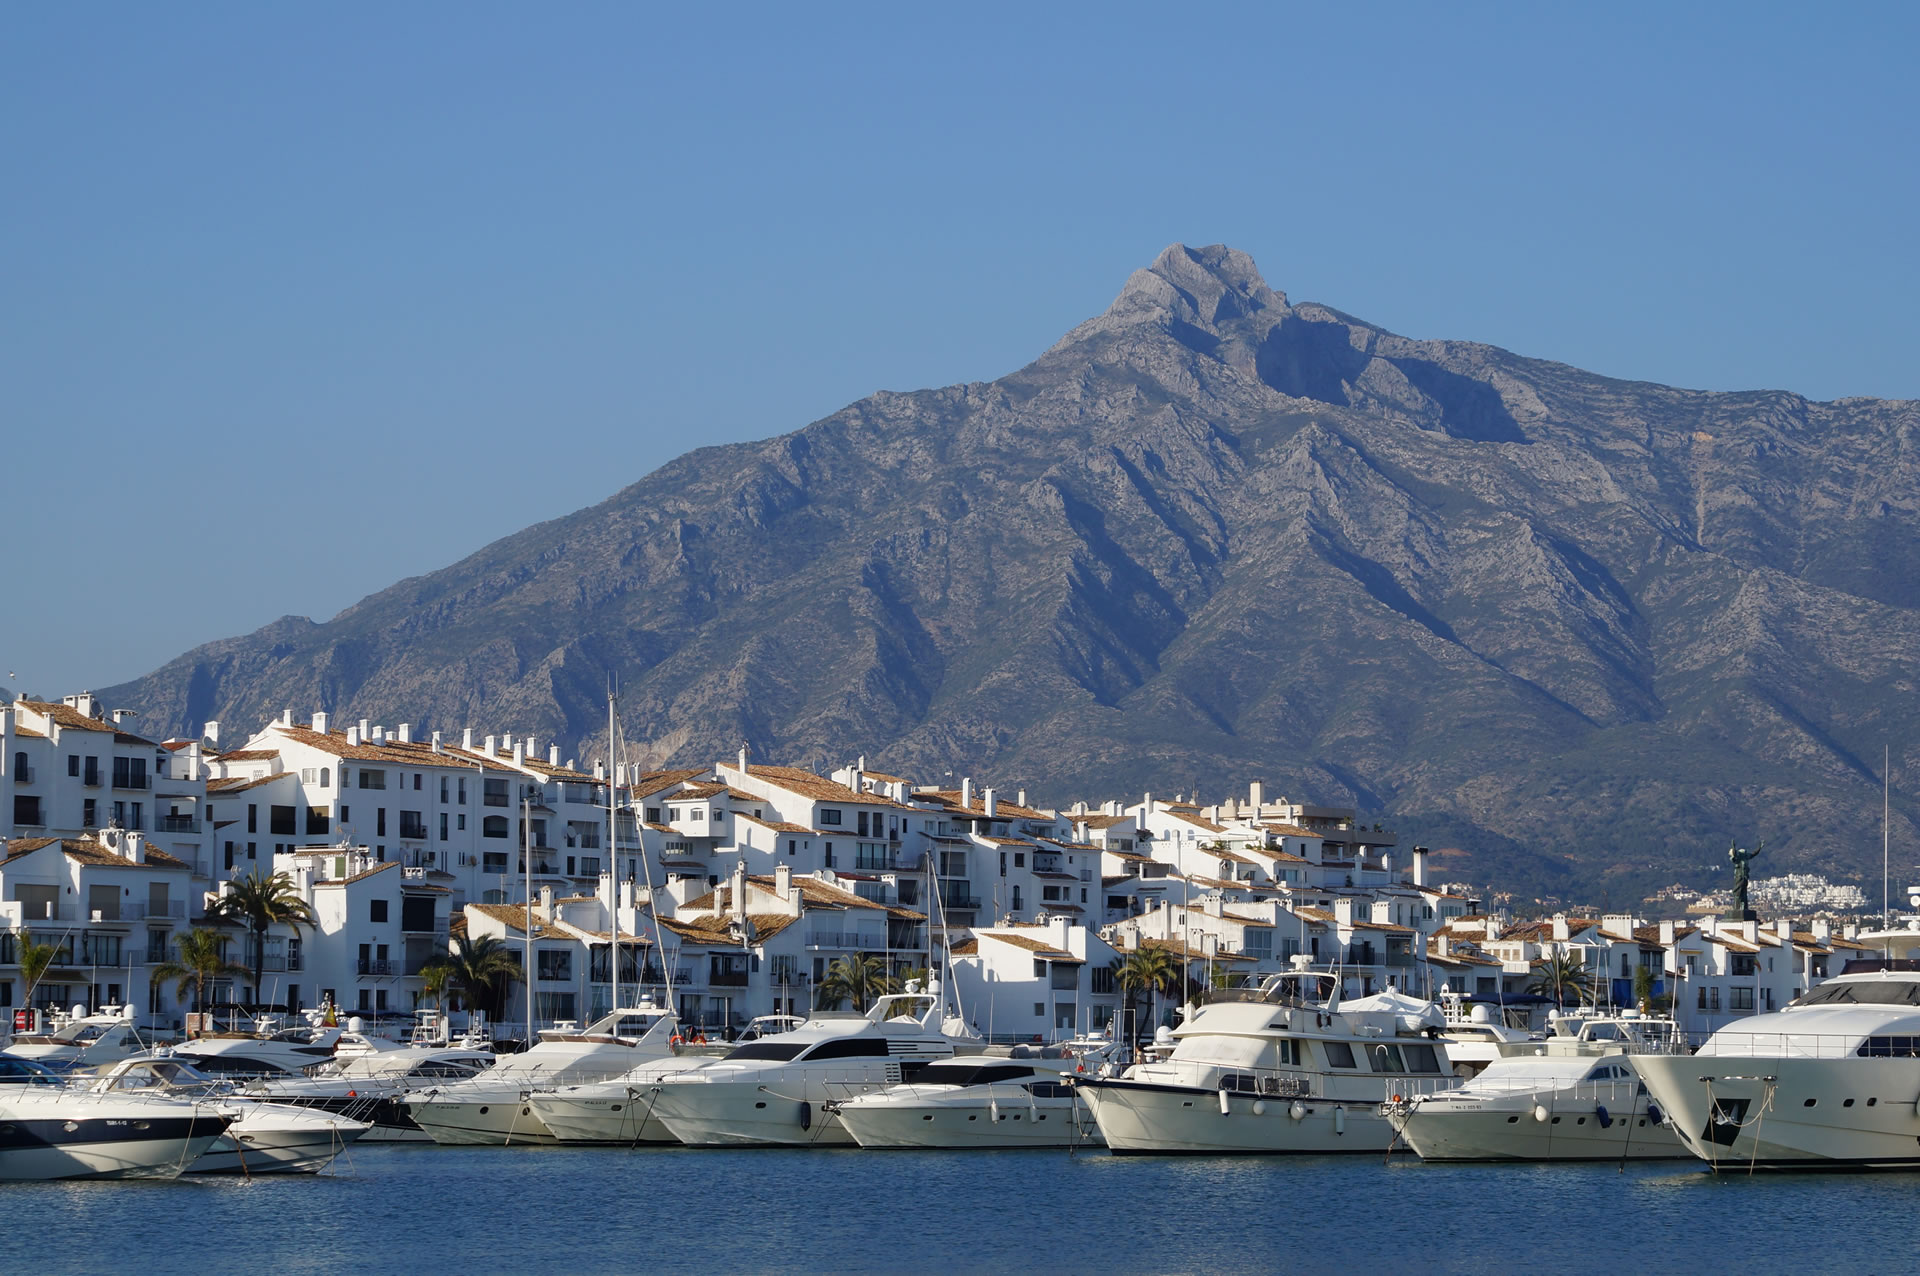 2014 - A great year for the Costa del Sol and Marbella